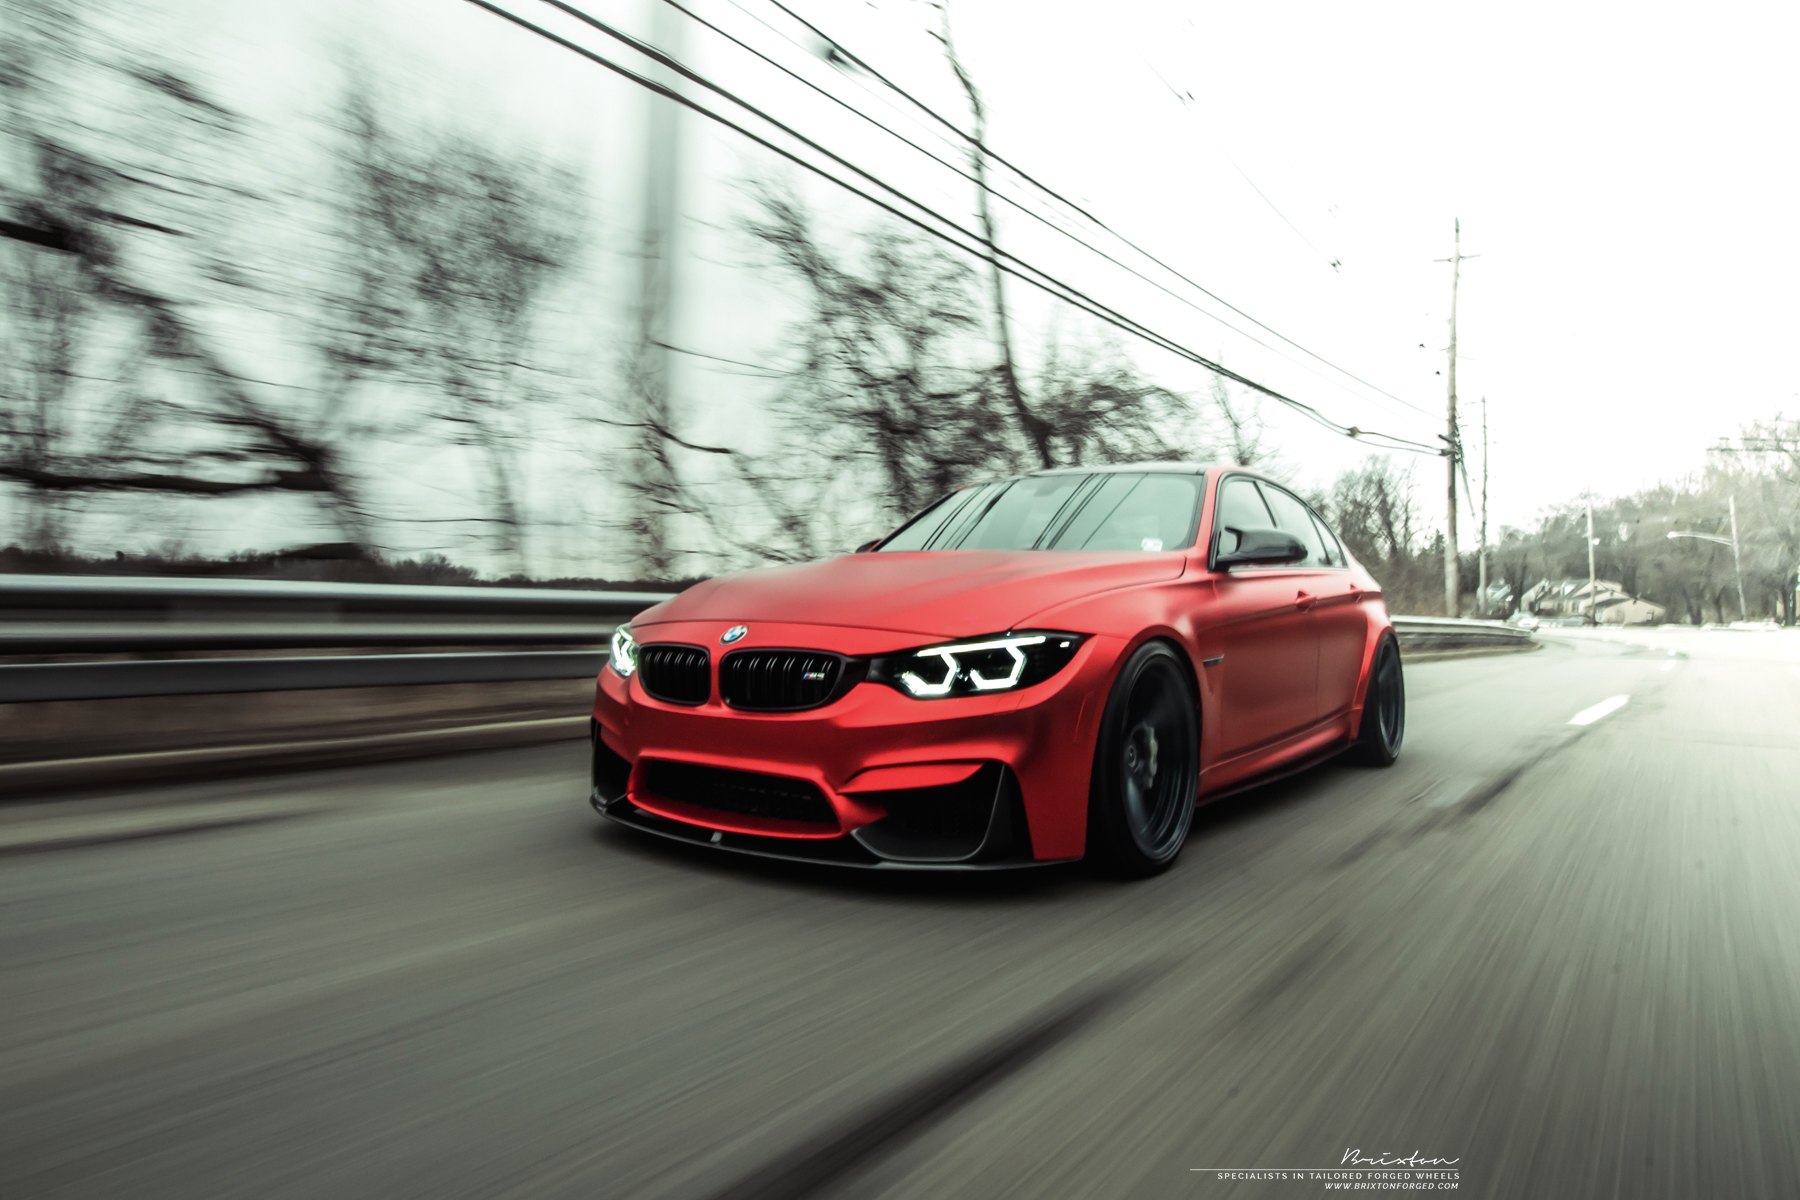 Brixton Forged Wheels on Red BMW 3-Series - Photo by Brixton Forged Wheels